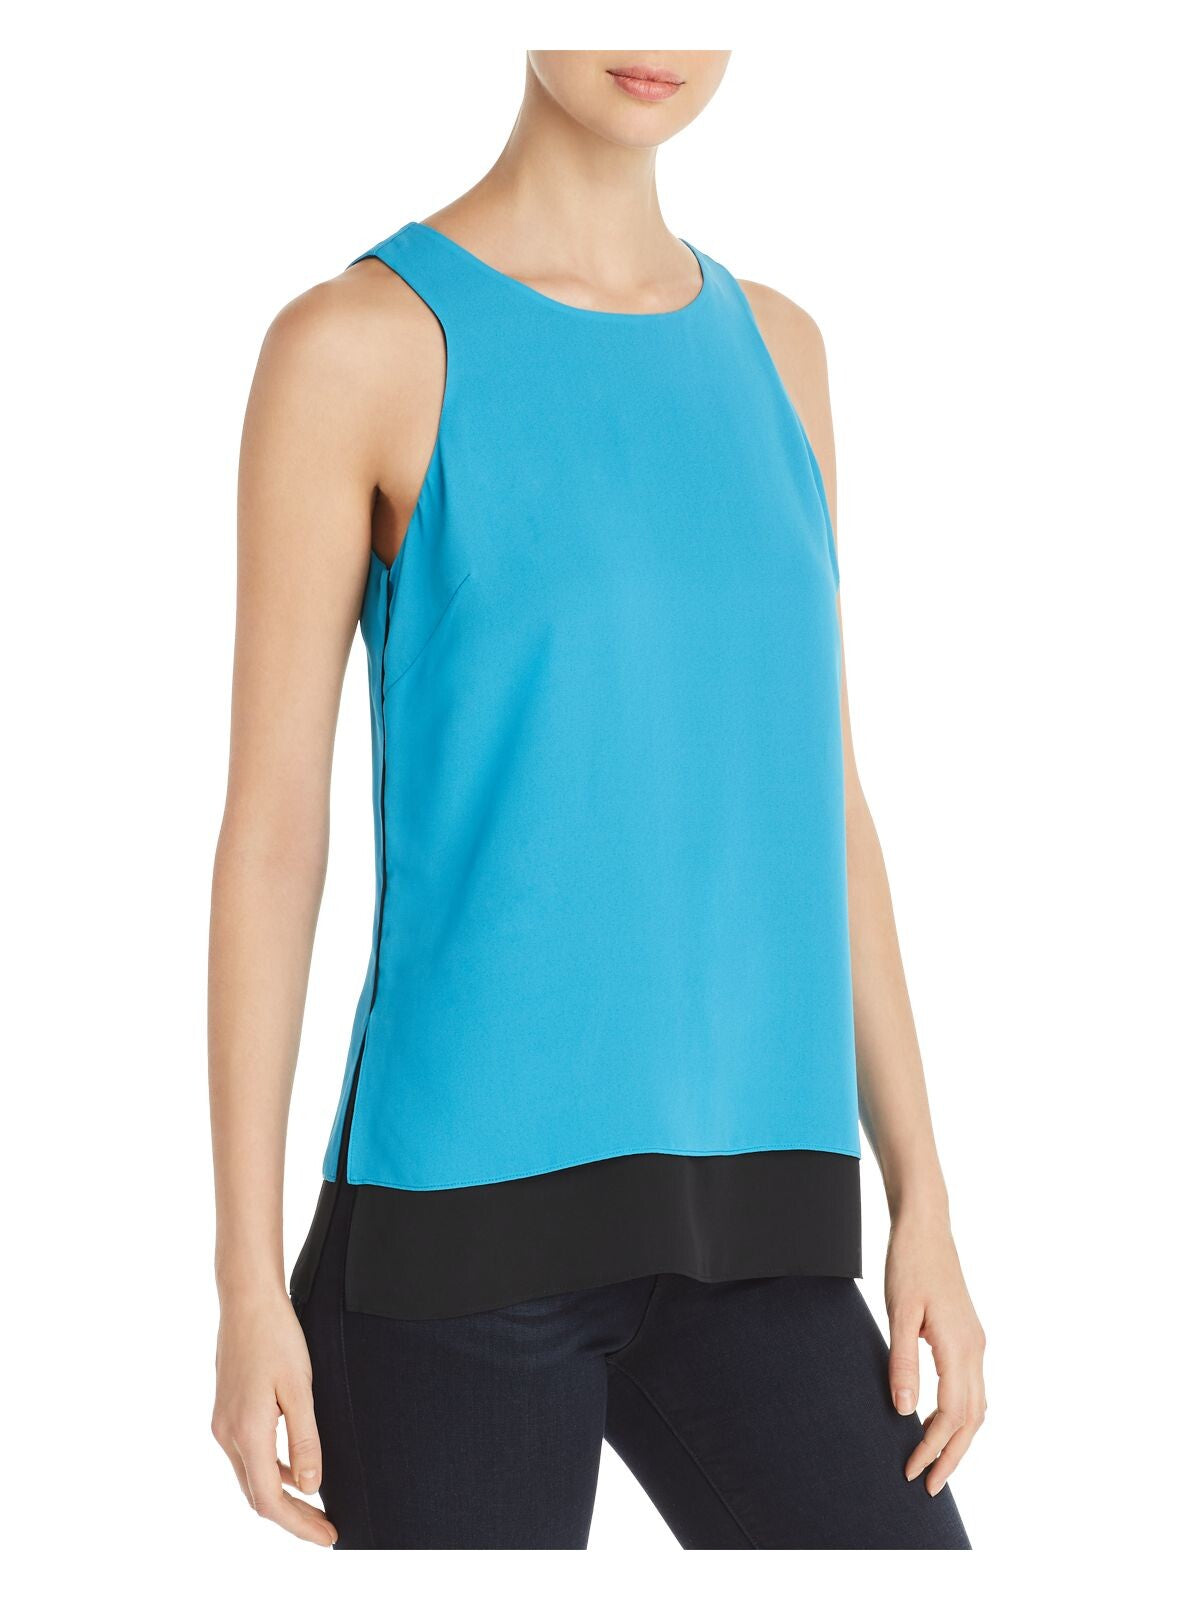 LE GALI Womens Turquoise Tie Solid Sleeveless Jewel Neck Top Size: XS